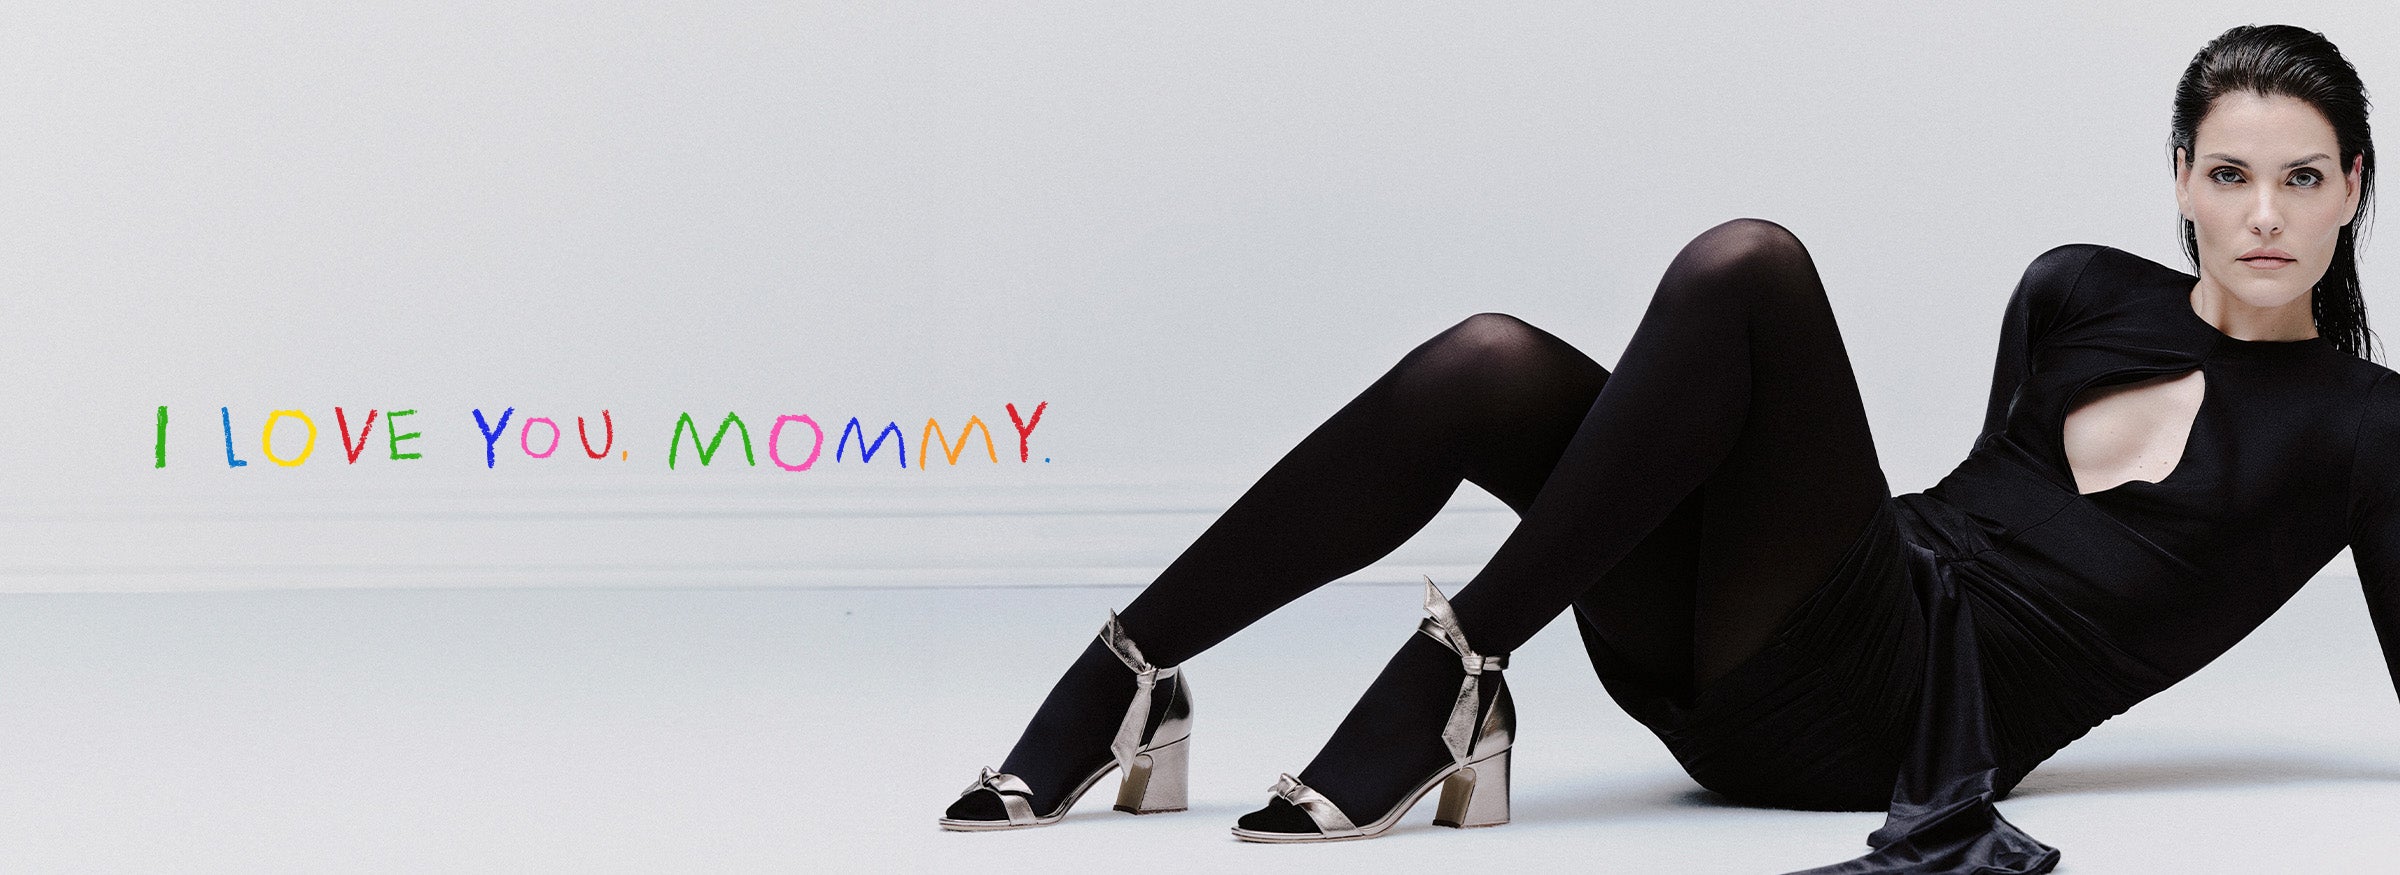 A woman elegantly lies on the ground, wearing a sleek black dress and tights. Her black hair is brushed back as she showcases the Clarita Curve 60 in Metallic Luna Shade. The touching text reads: I LOVE YOU MOMMY.